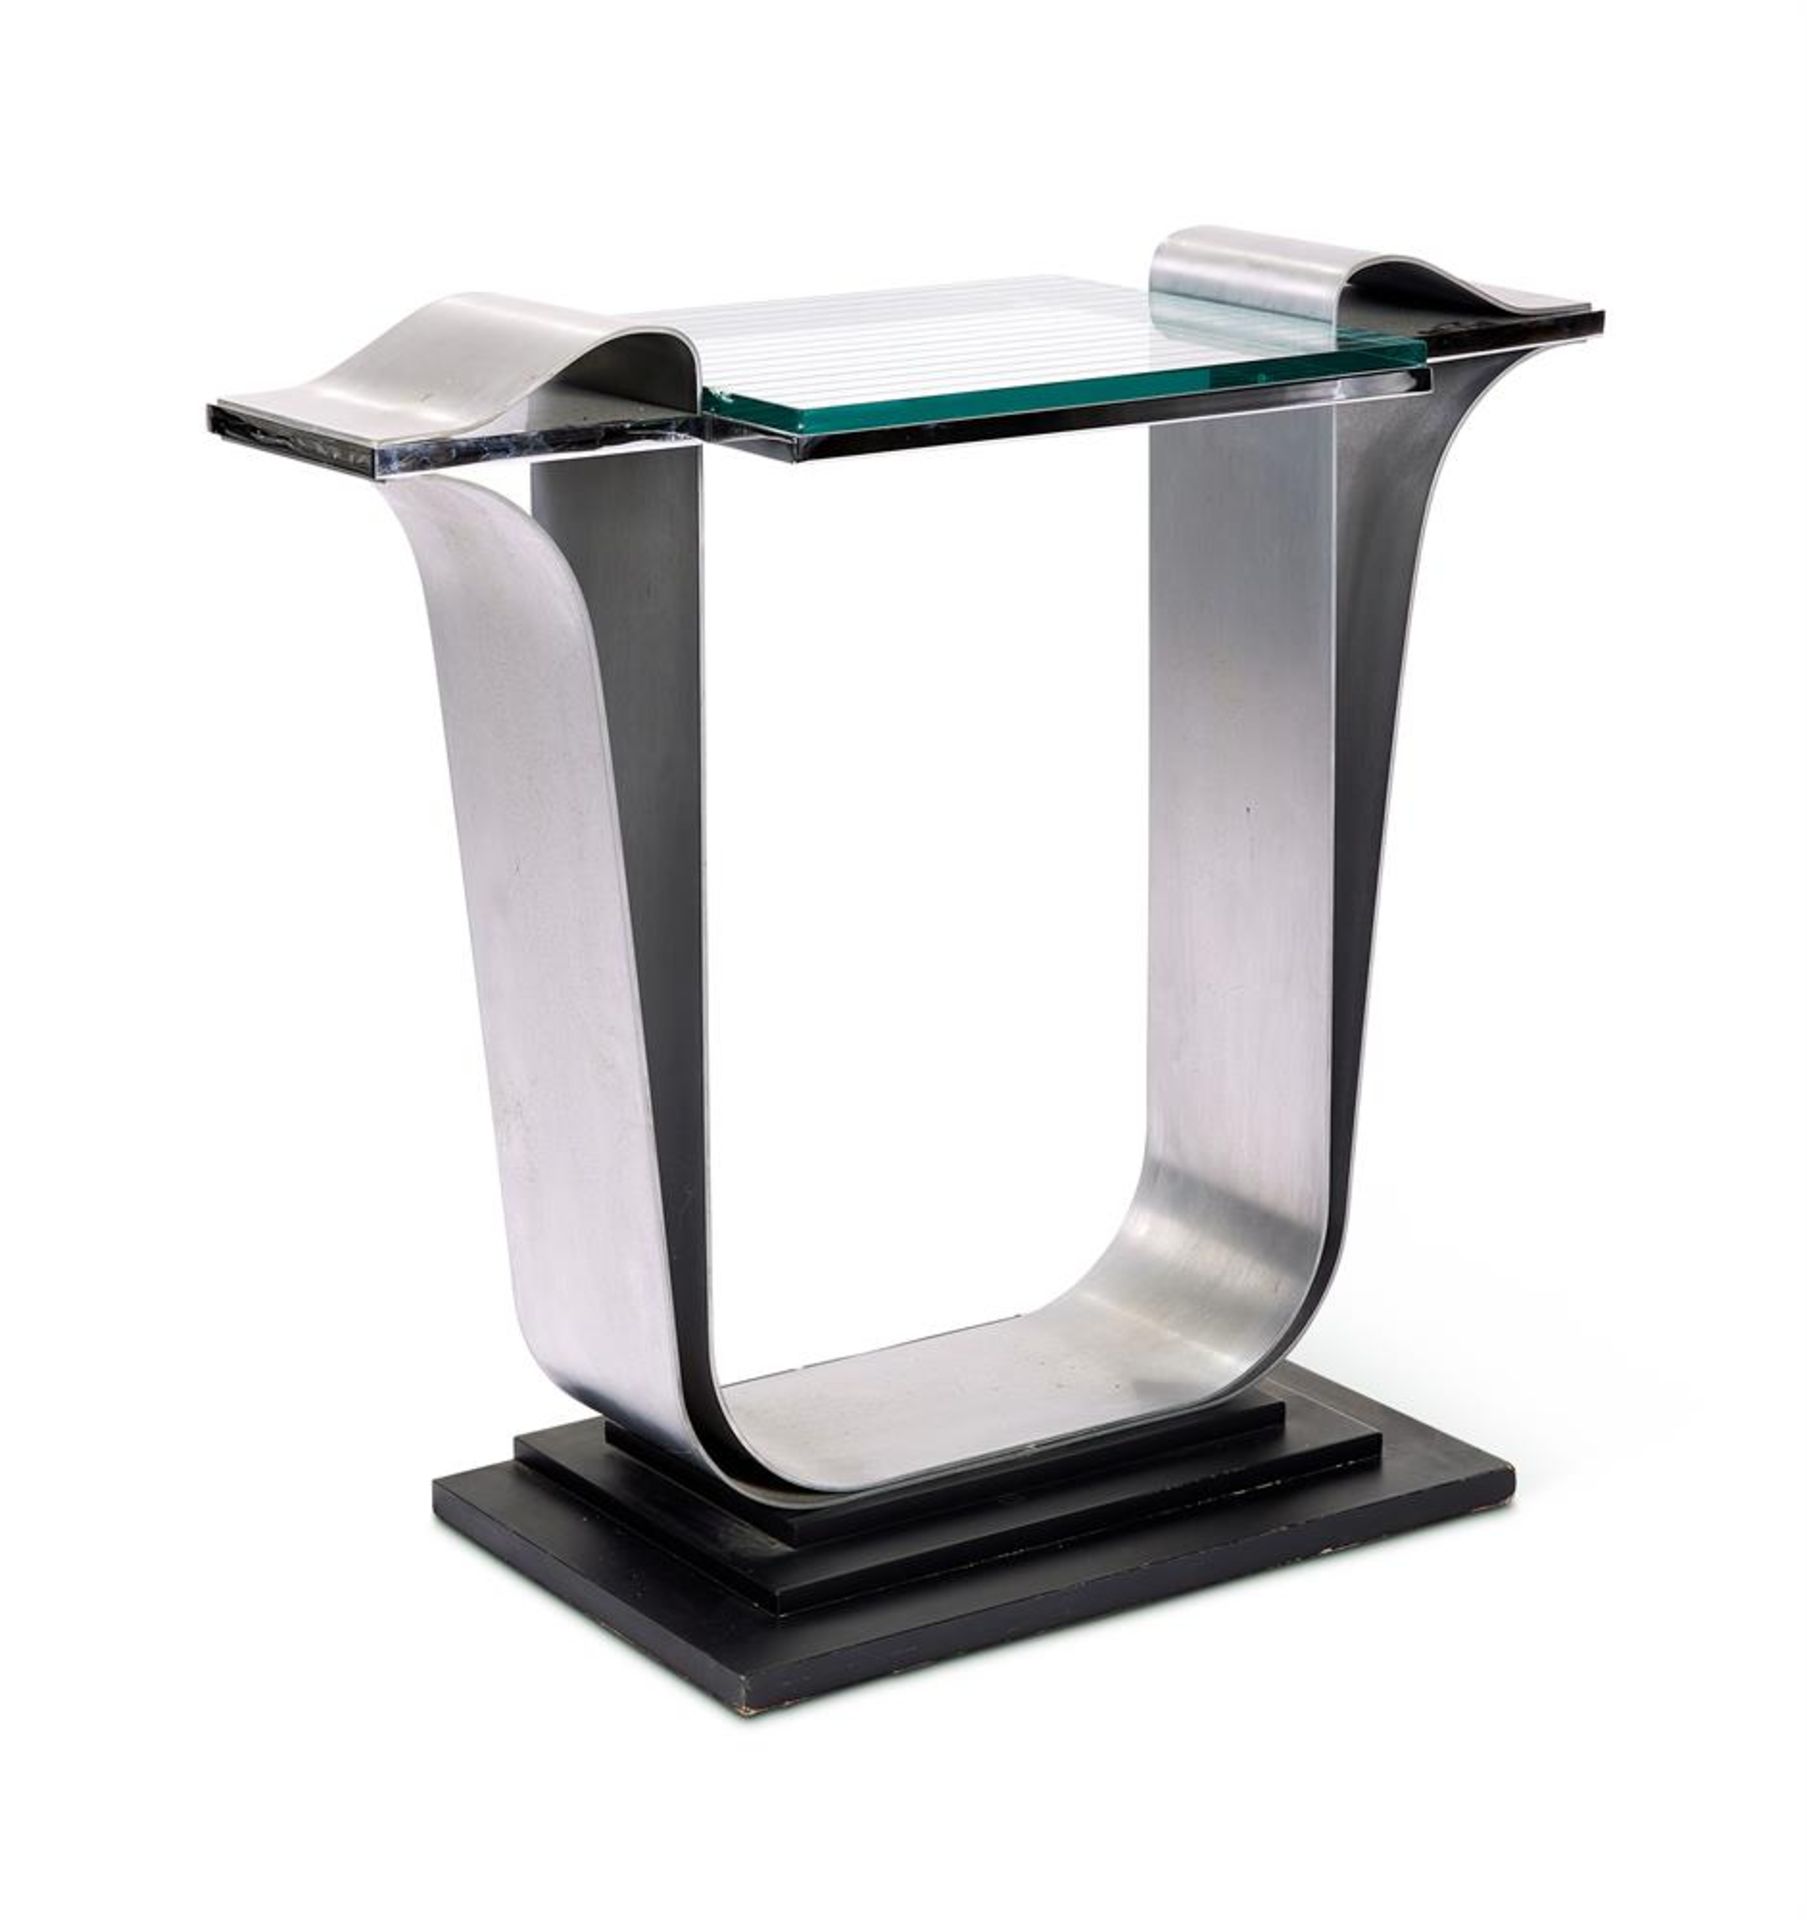 A BRUSHED AND POLISHED STEEL CONSOLE TABLE DESIGNED BY JAY SPECTRE, CIRCA 1980 - Image 2 of 2